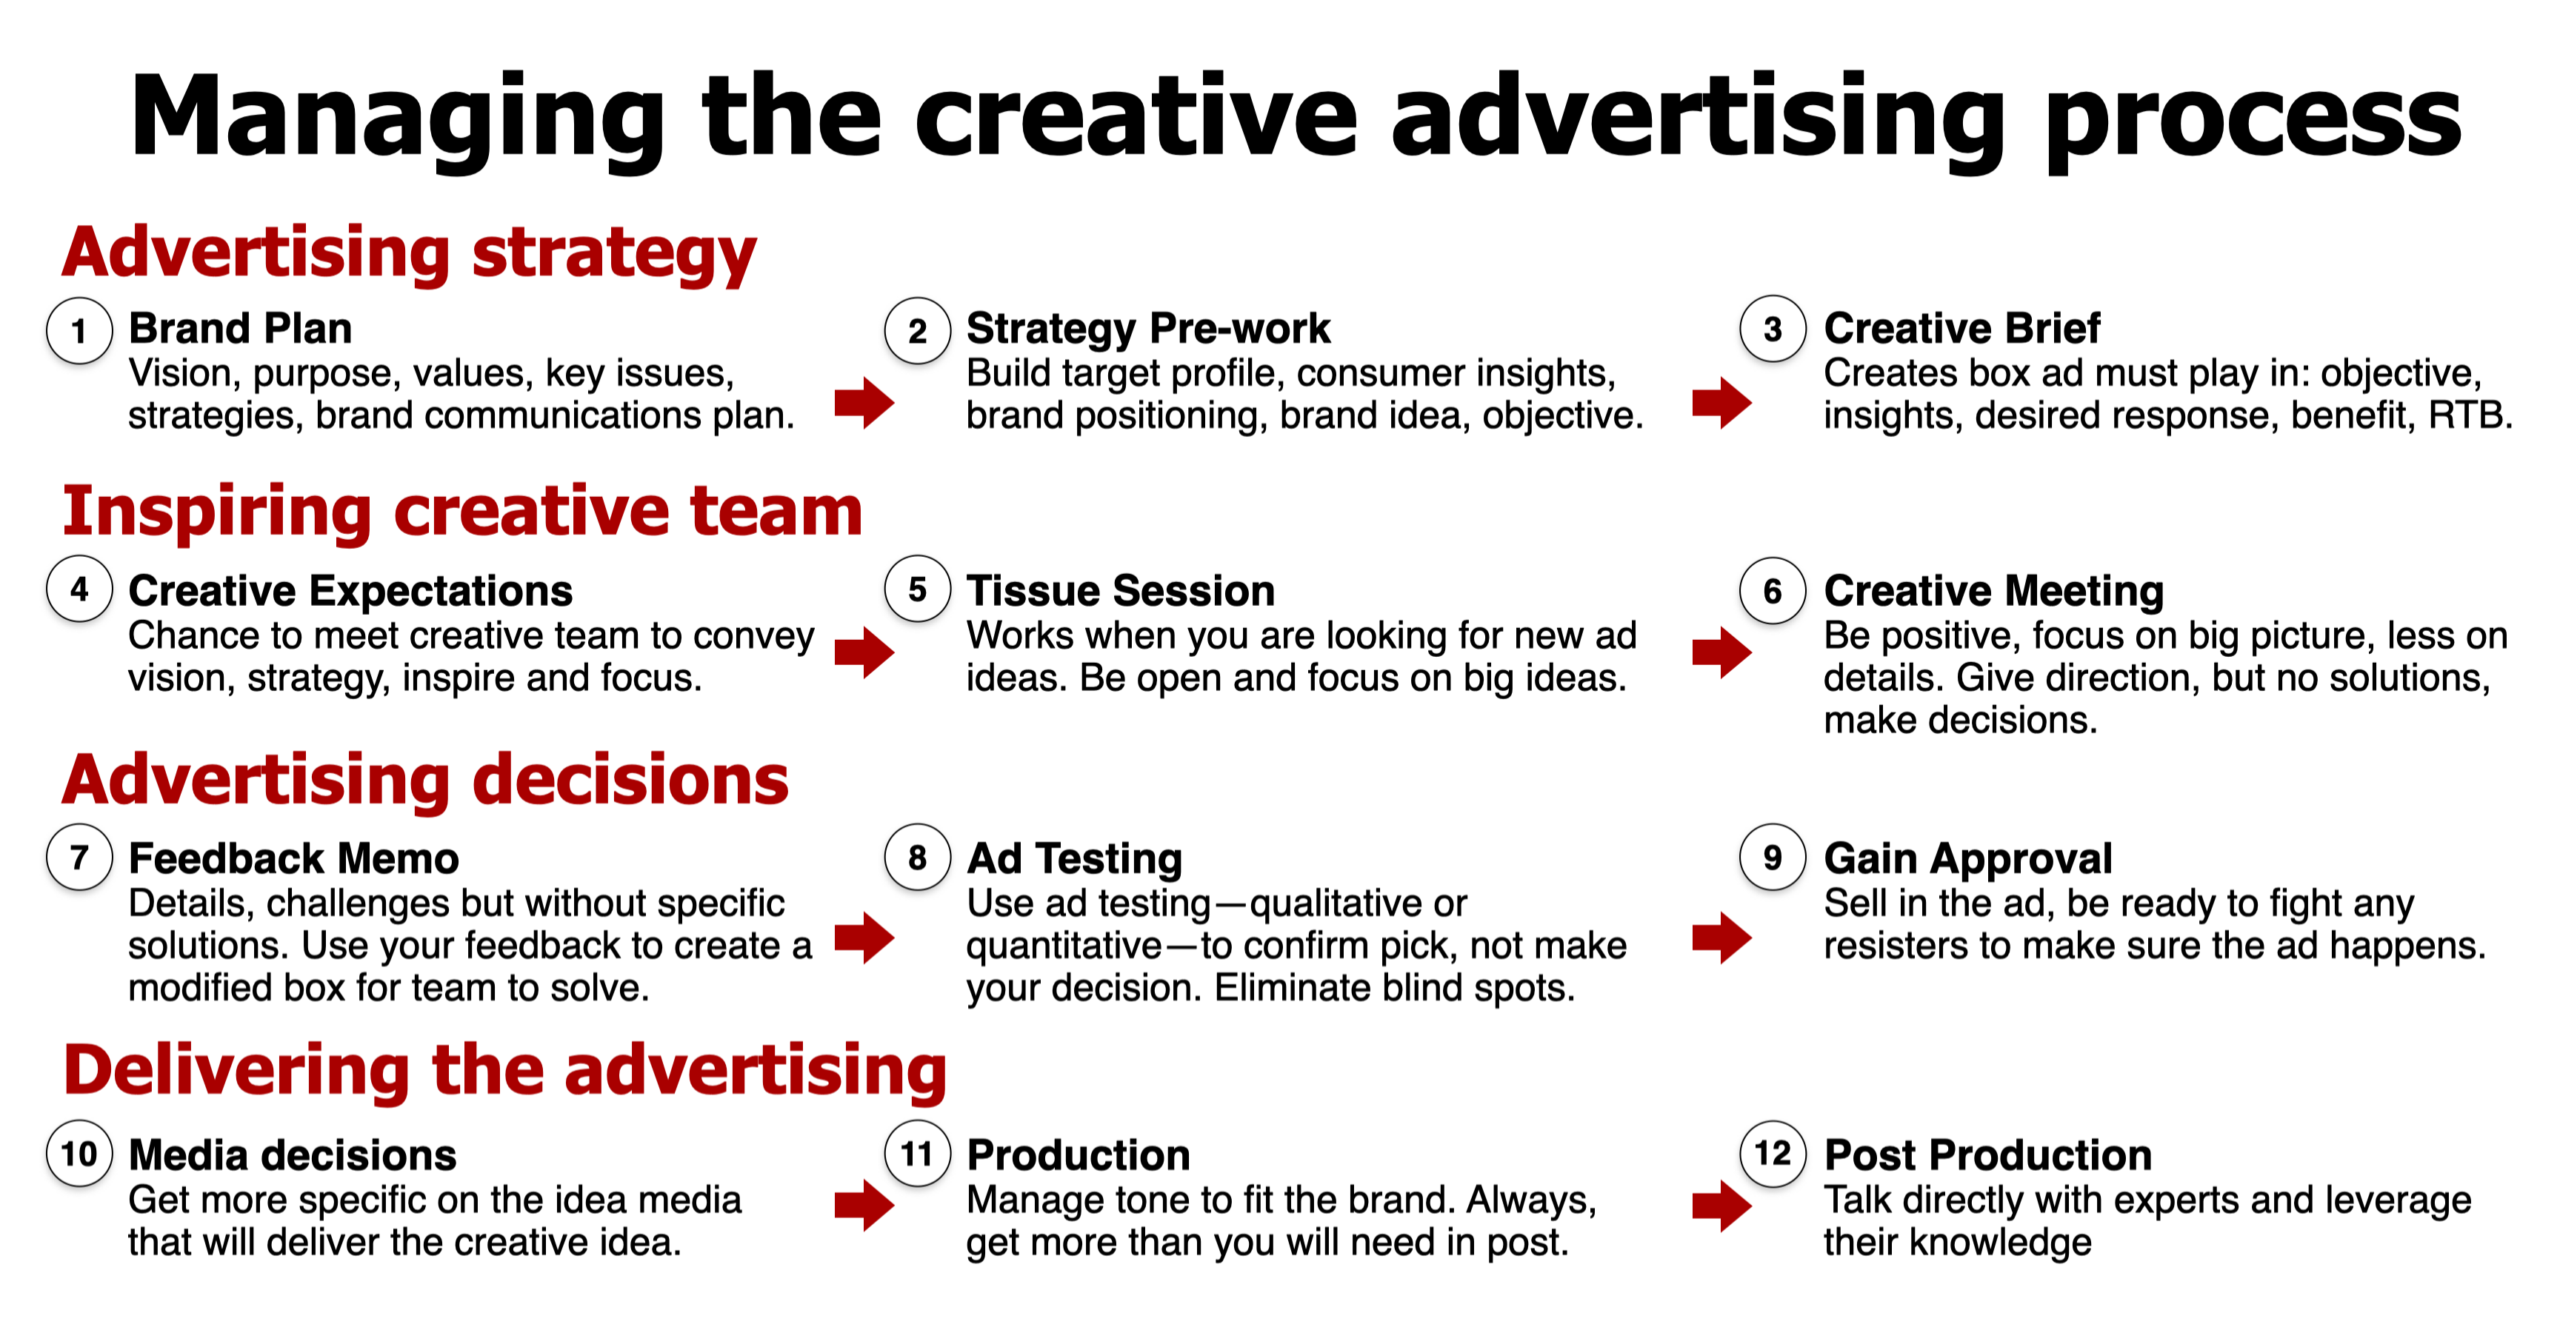 Managing the creative advertising process